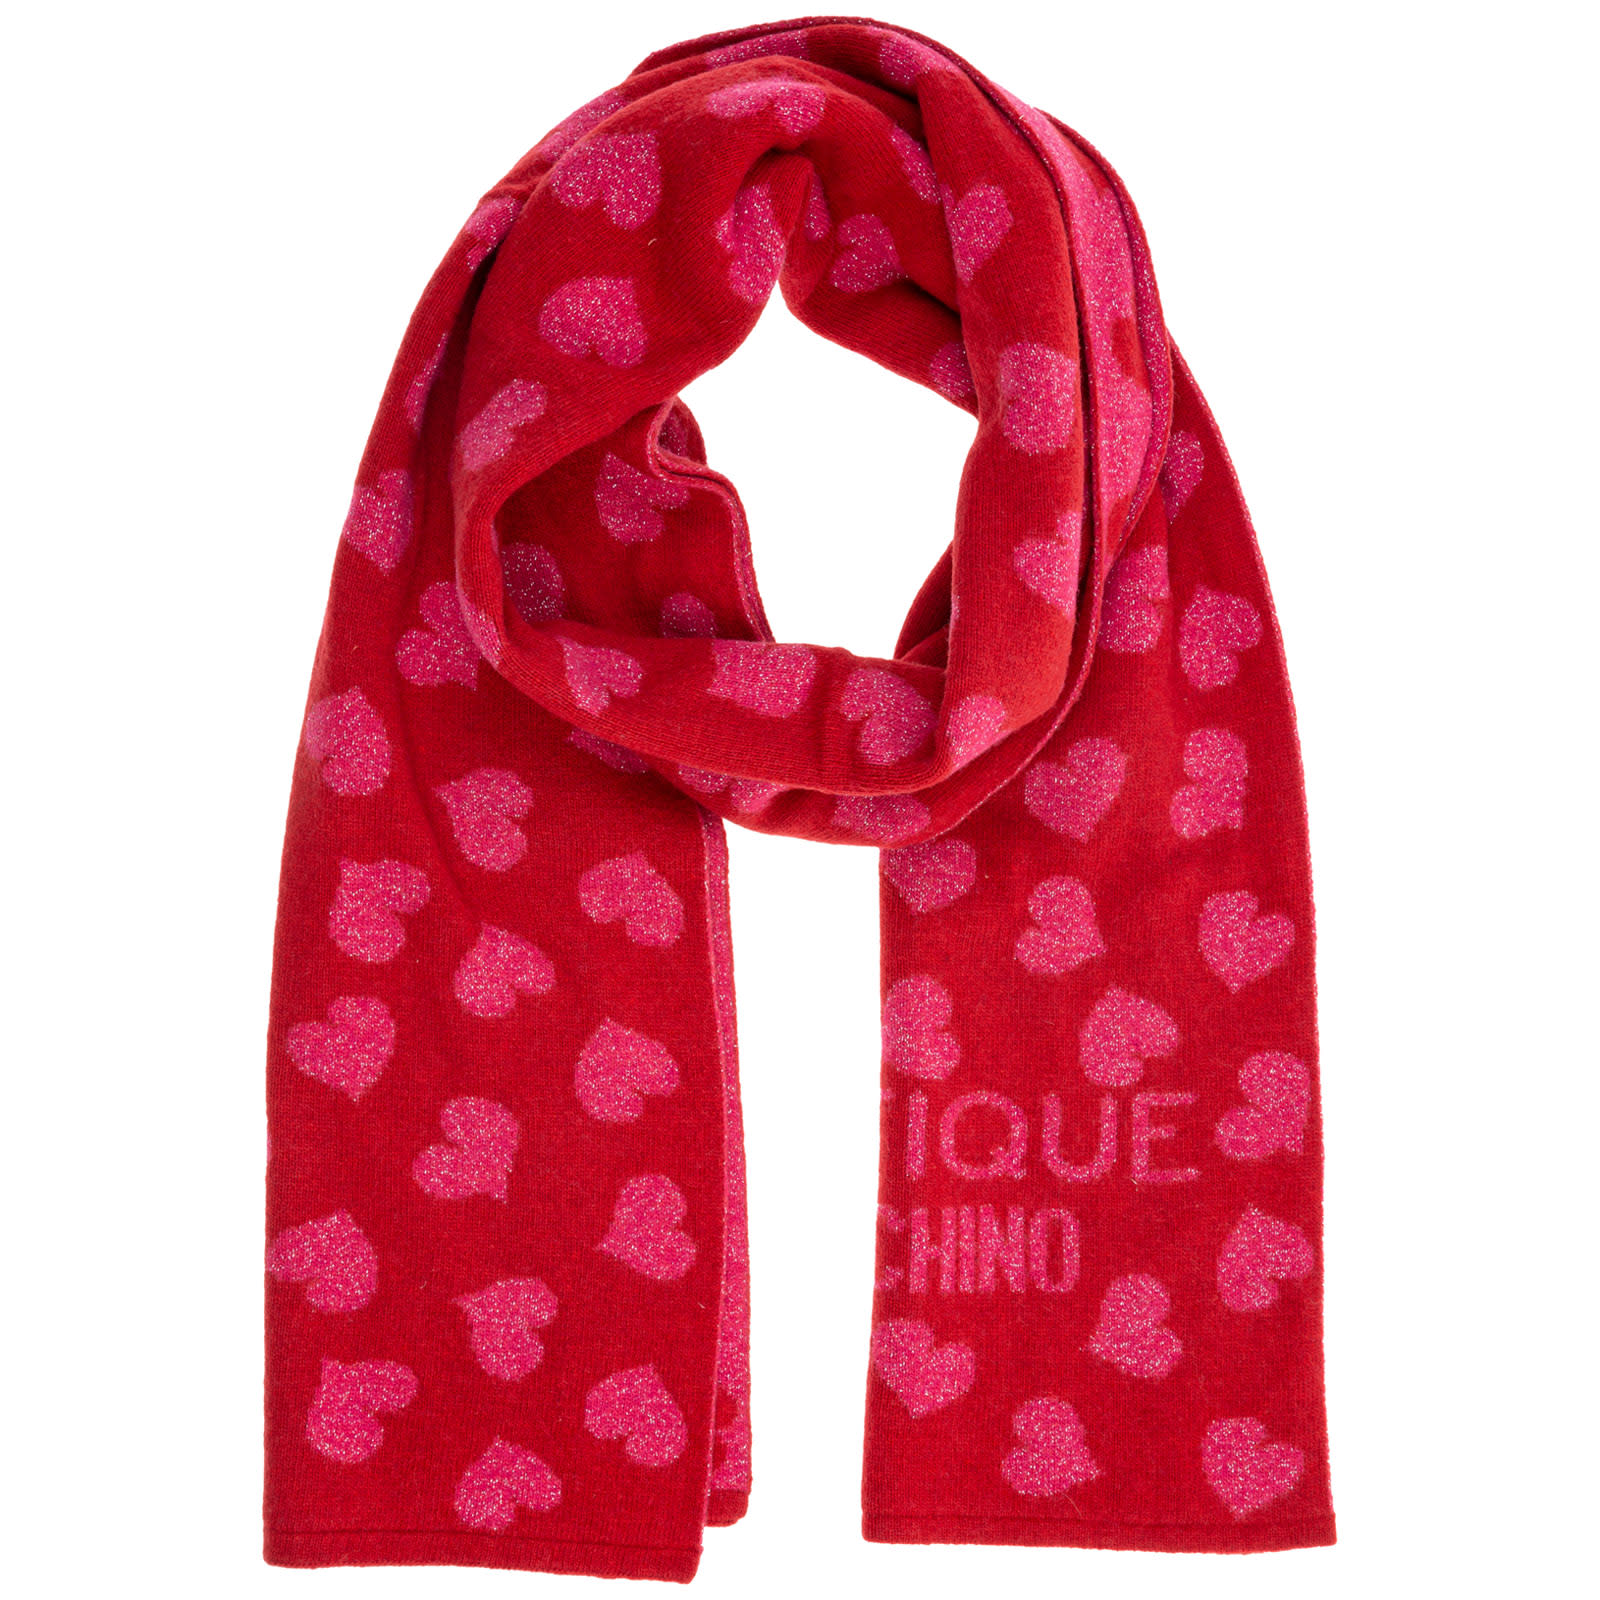 Boutique Moschino Double Question Mark Scarf